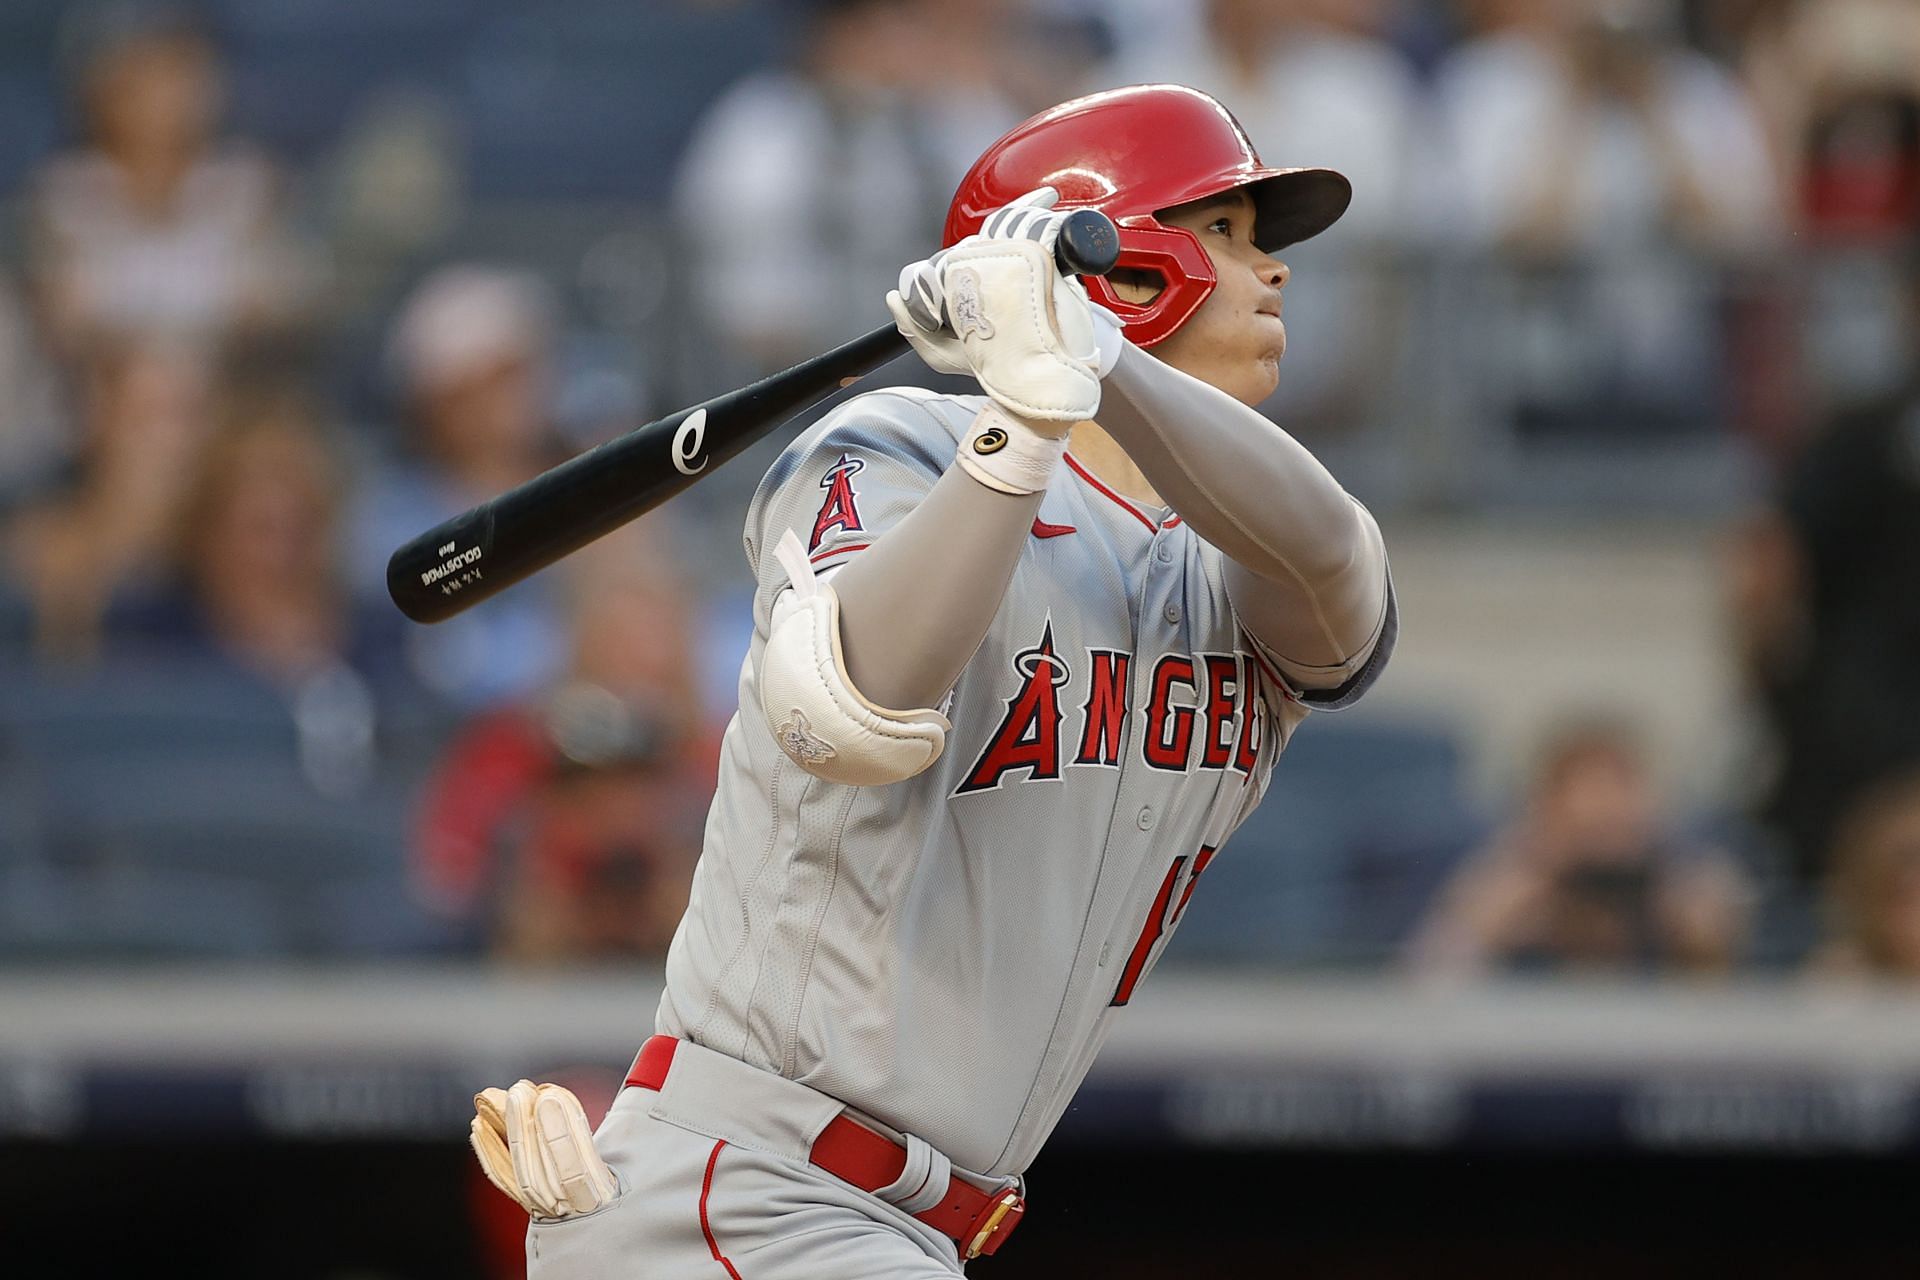  Shohei Ohtani #17 of the Los Angeles Angels hits a home run during the third inning against the New York Yankees on June 29, 2021 (Photo by Sarah Stier/Getty Images).